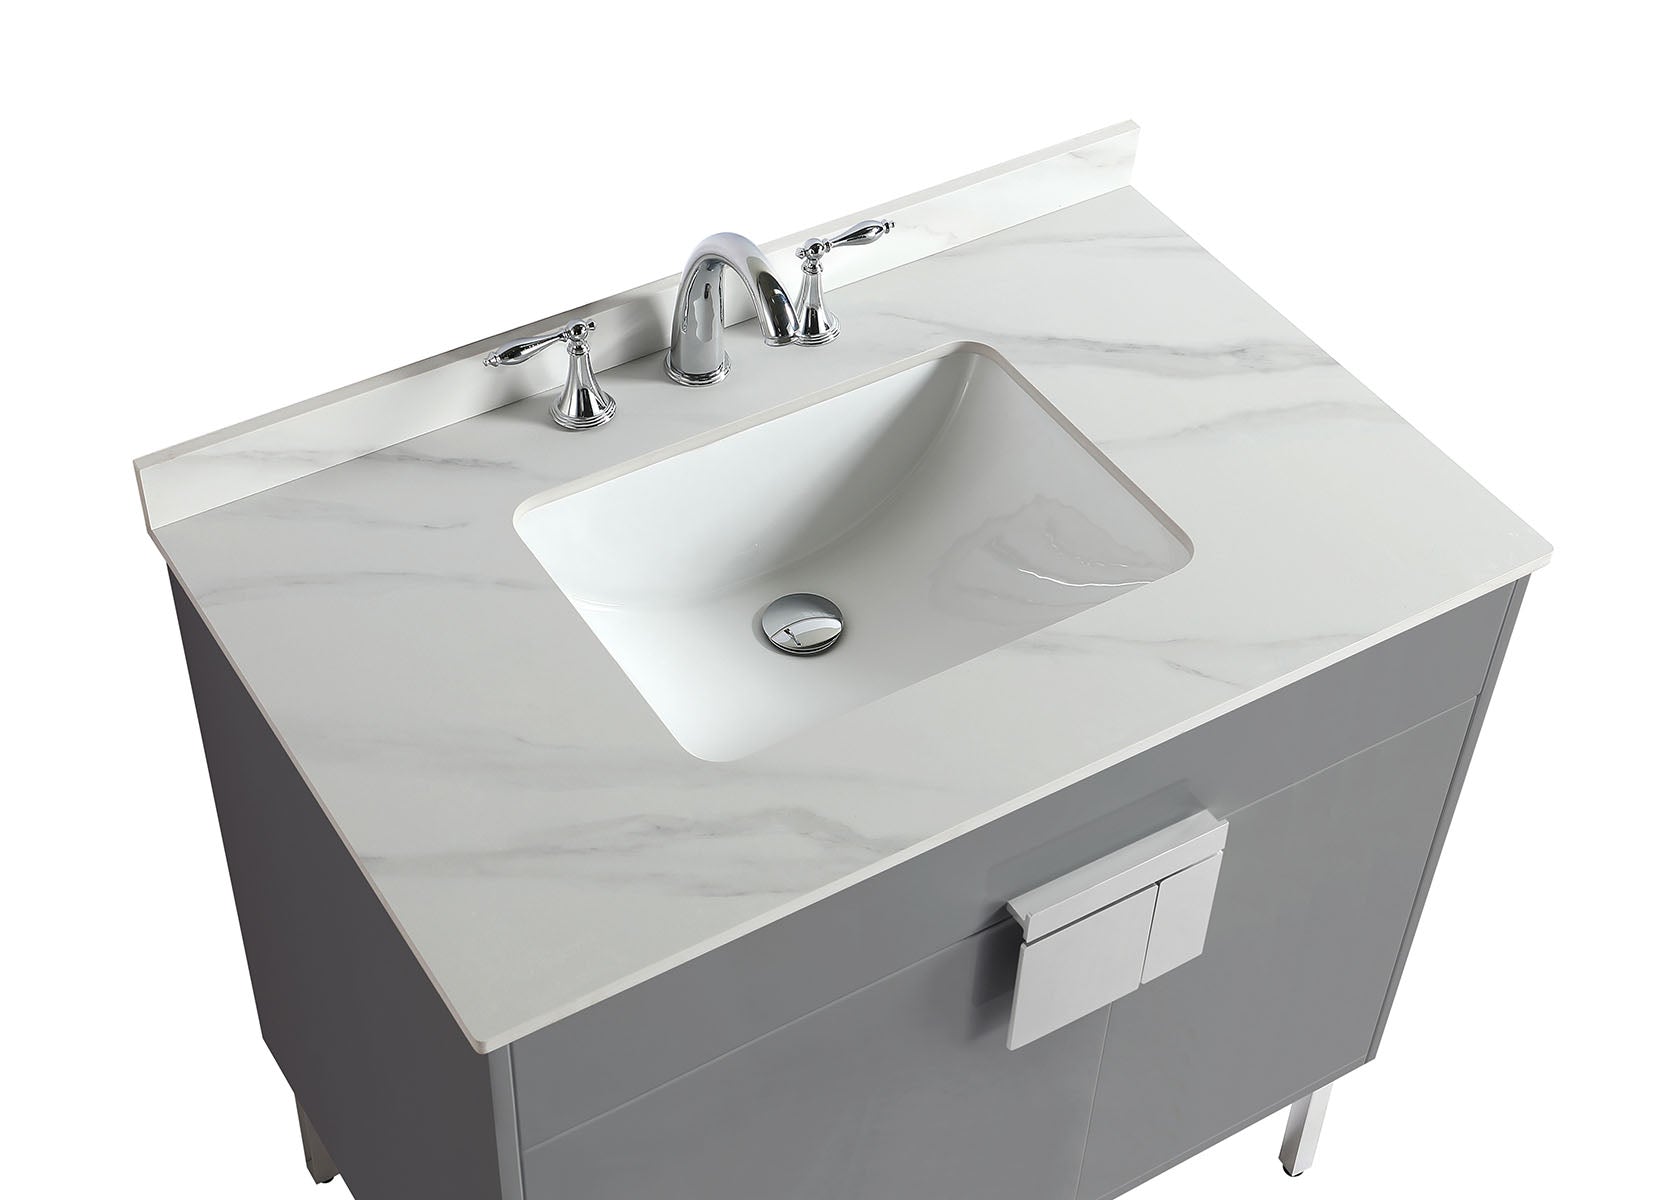 36" Vanity with Sintered Stone Countertop (Matte Grey）V9003 Series - iStyle Bath